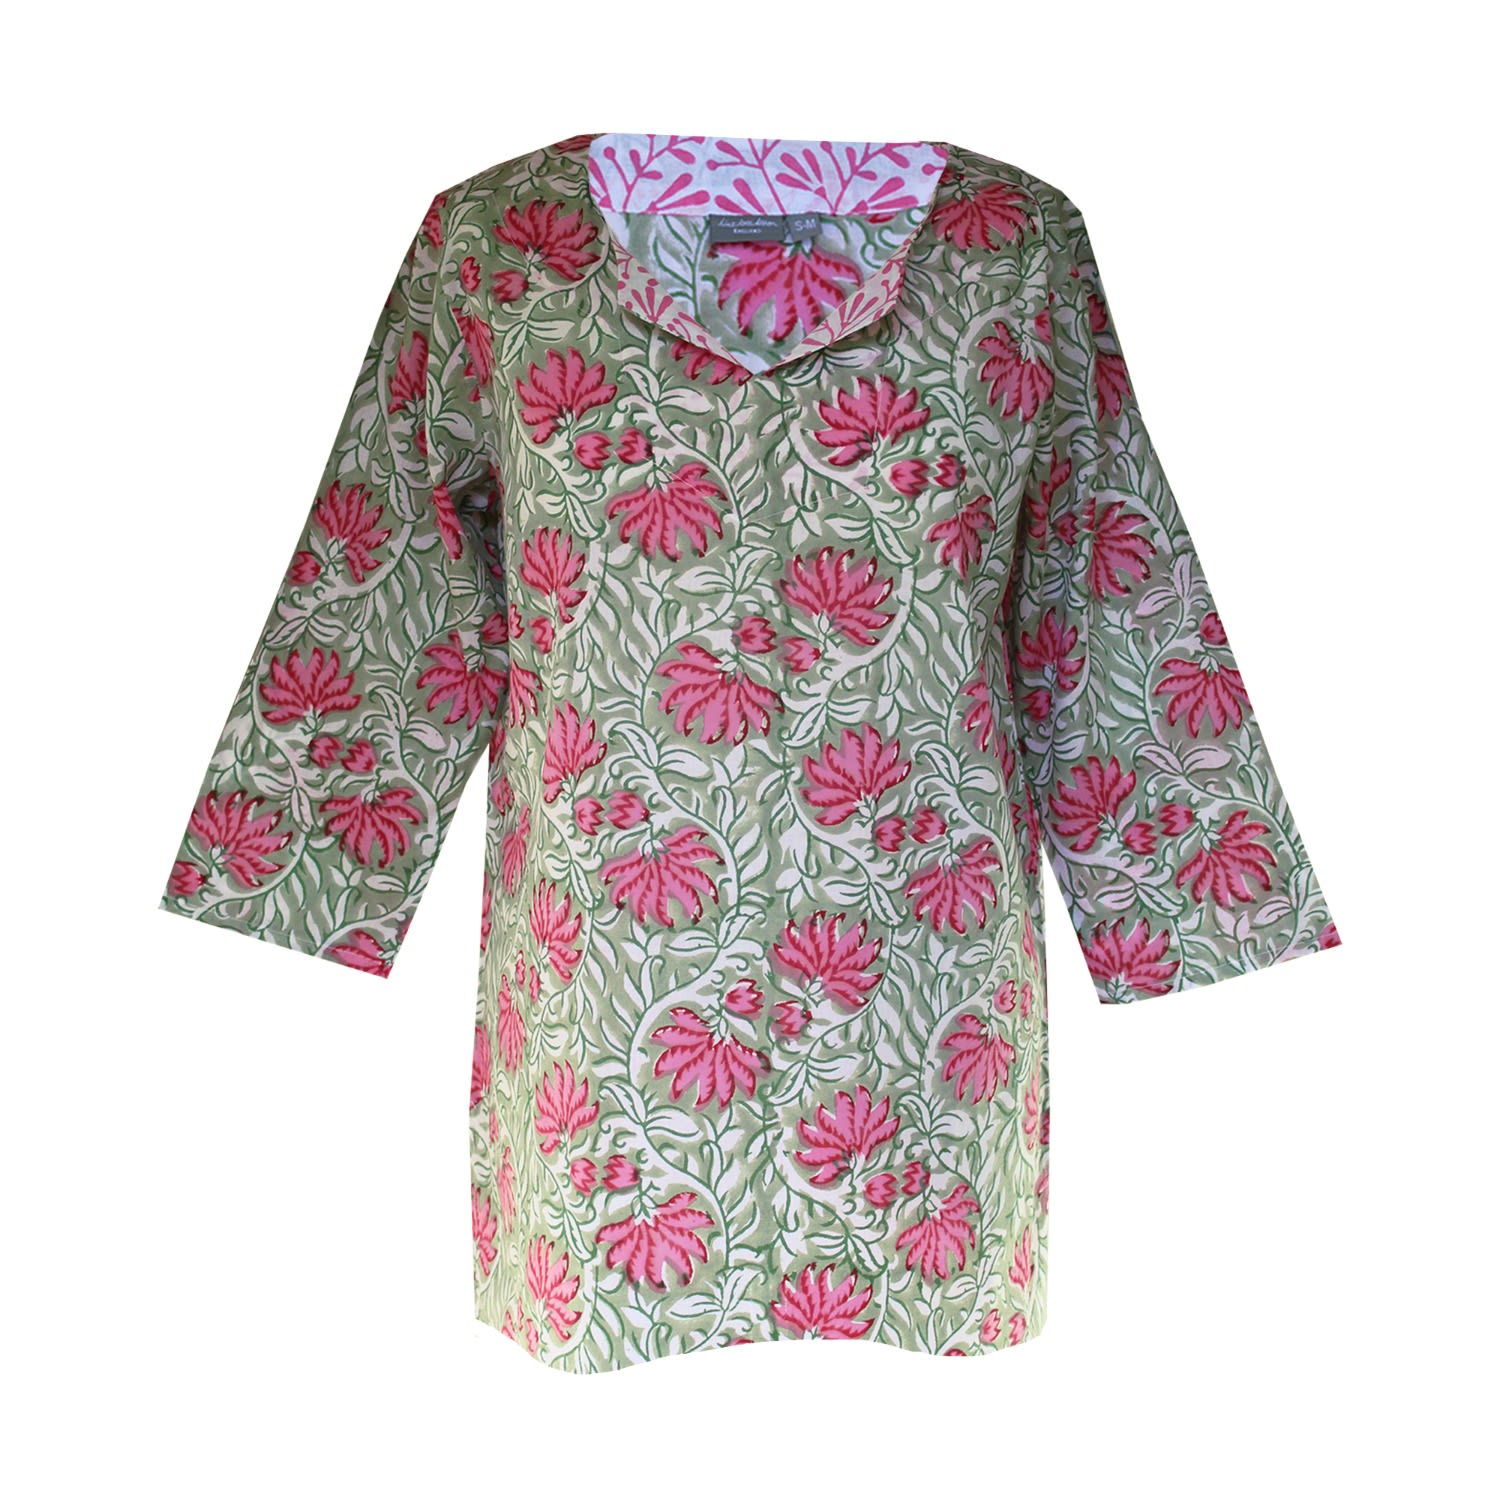 Lime Tree Design Women's Block Printed Tunic Top Green Pink Floral